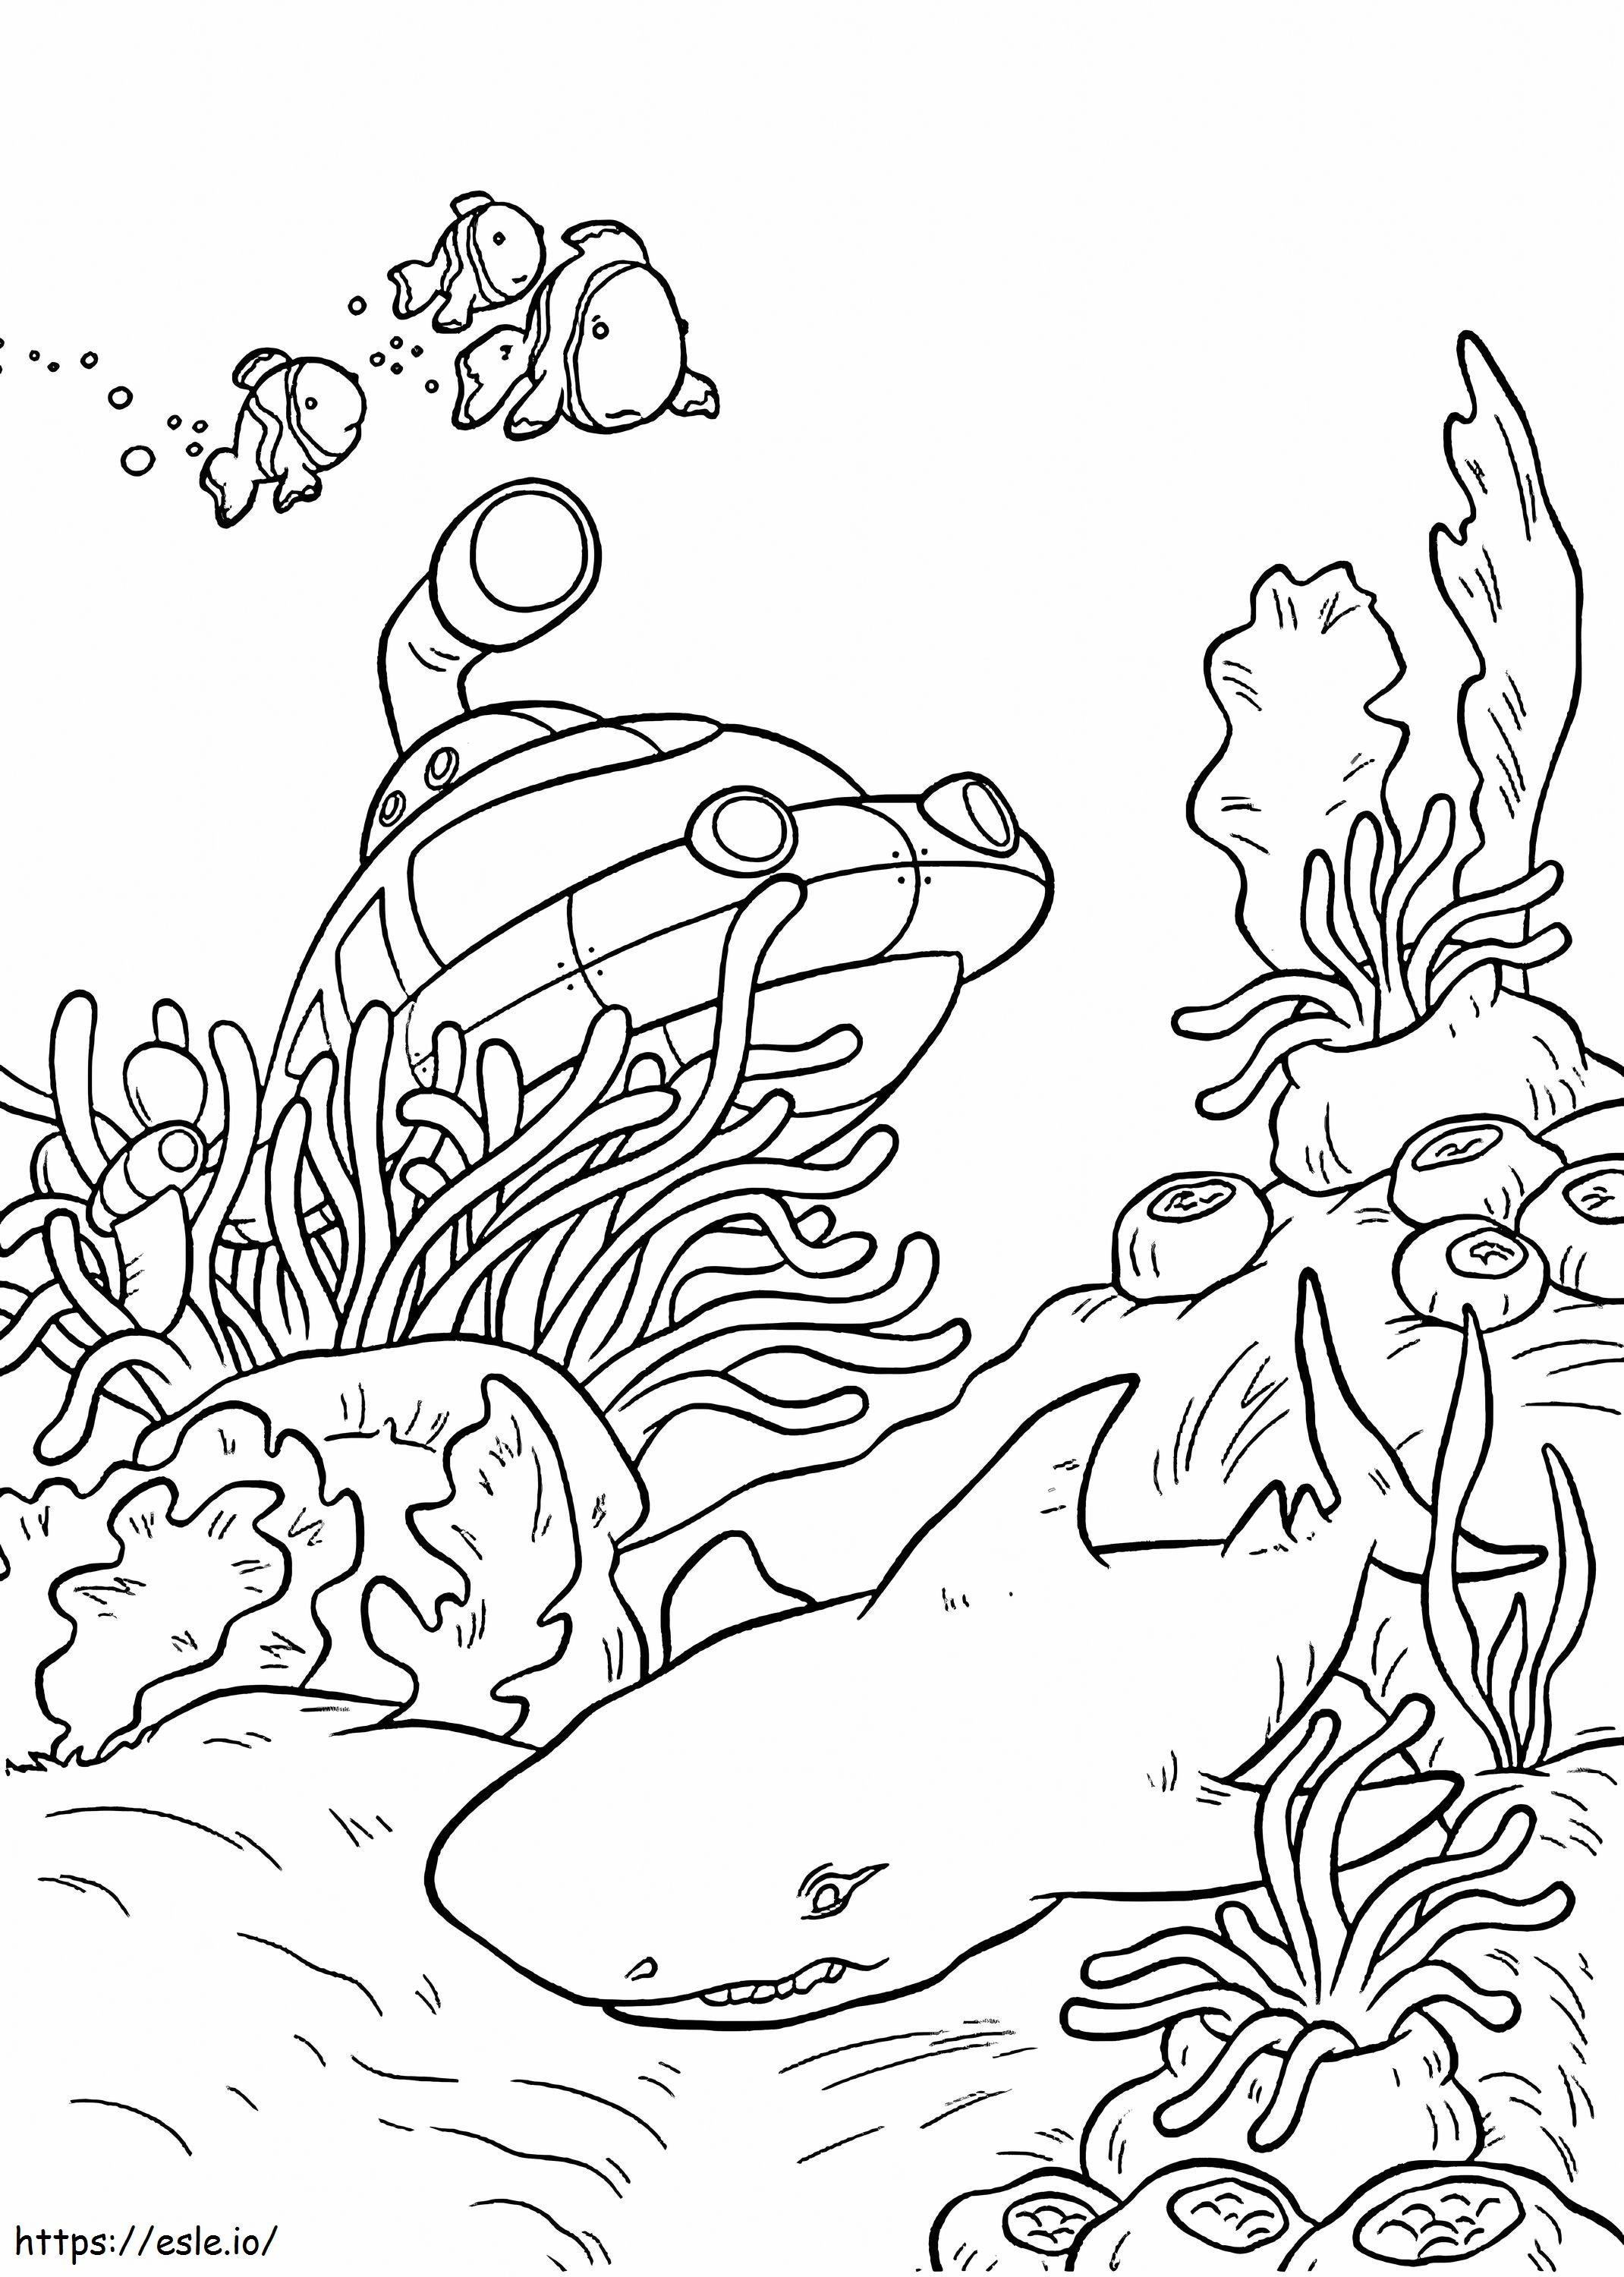 1544147549 7D982D113A0984F74016A384001Be9Ce coloring page